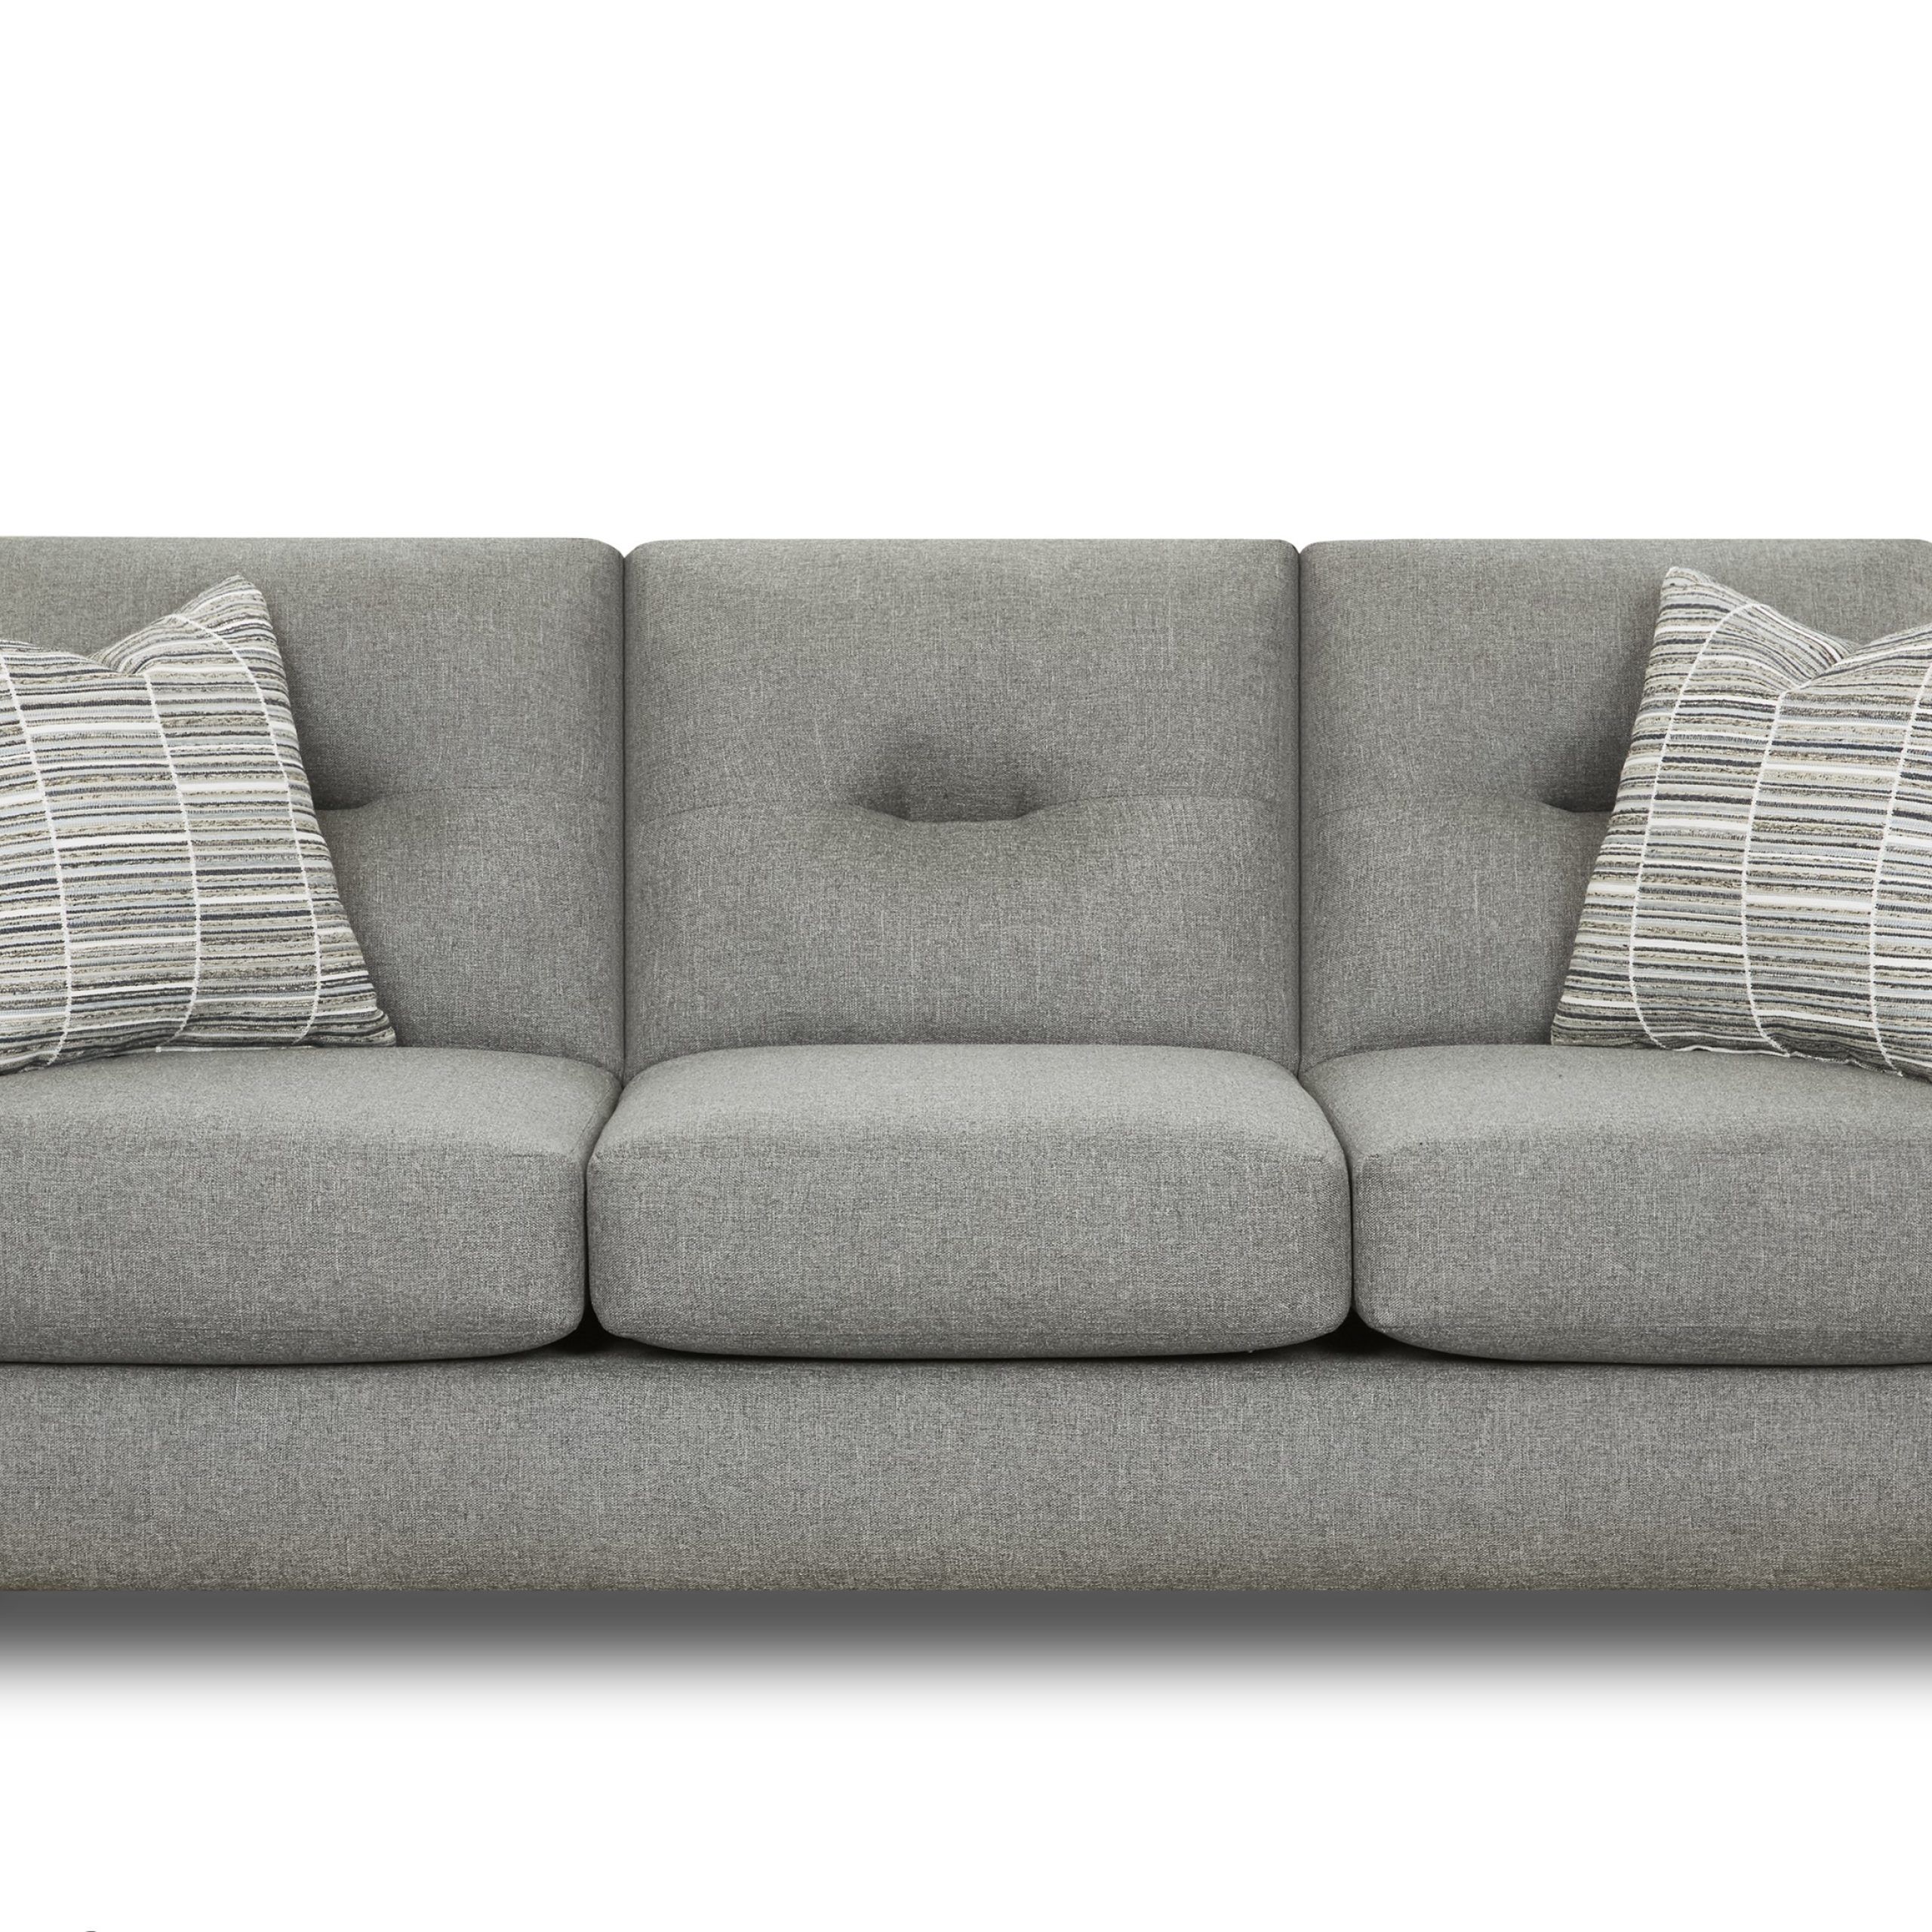 Tnt Charcoal Sofa B018638917fusion Furniture At Godwin's Furniture Within Light Charcoal Linen Sofas (View 14 of 20)